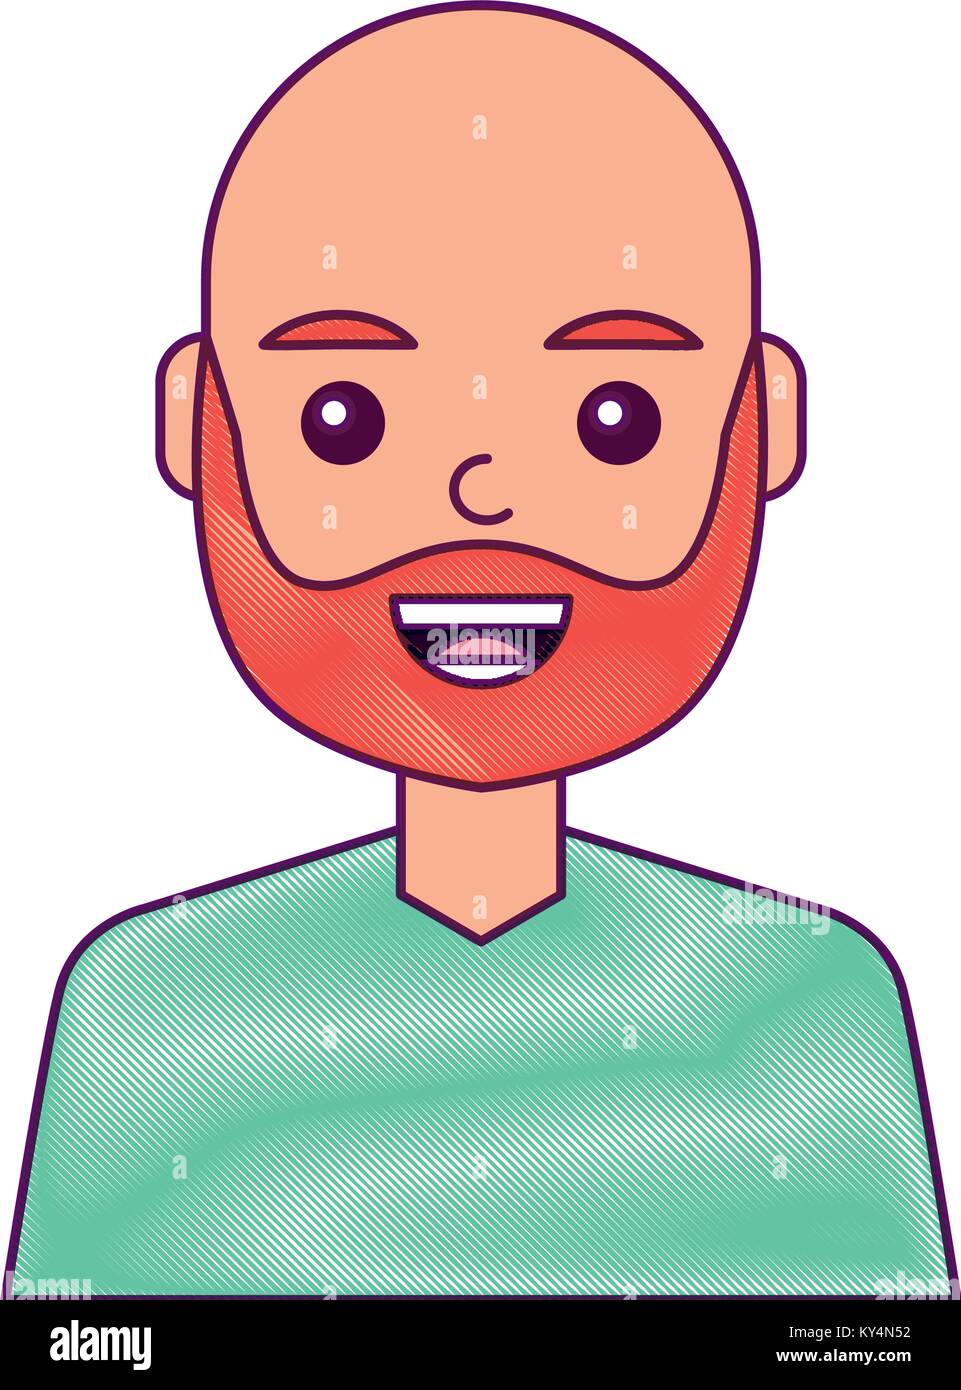 portrait man face laughing happy image vector illustration Stock Vector